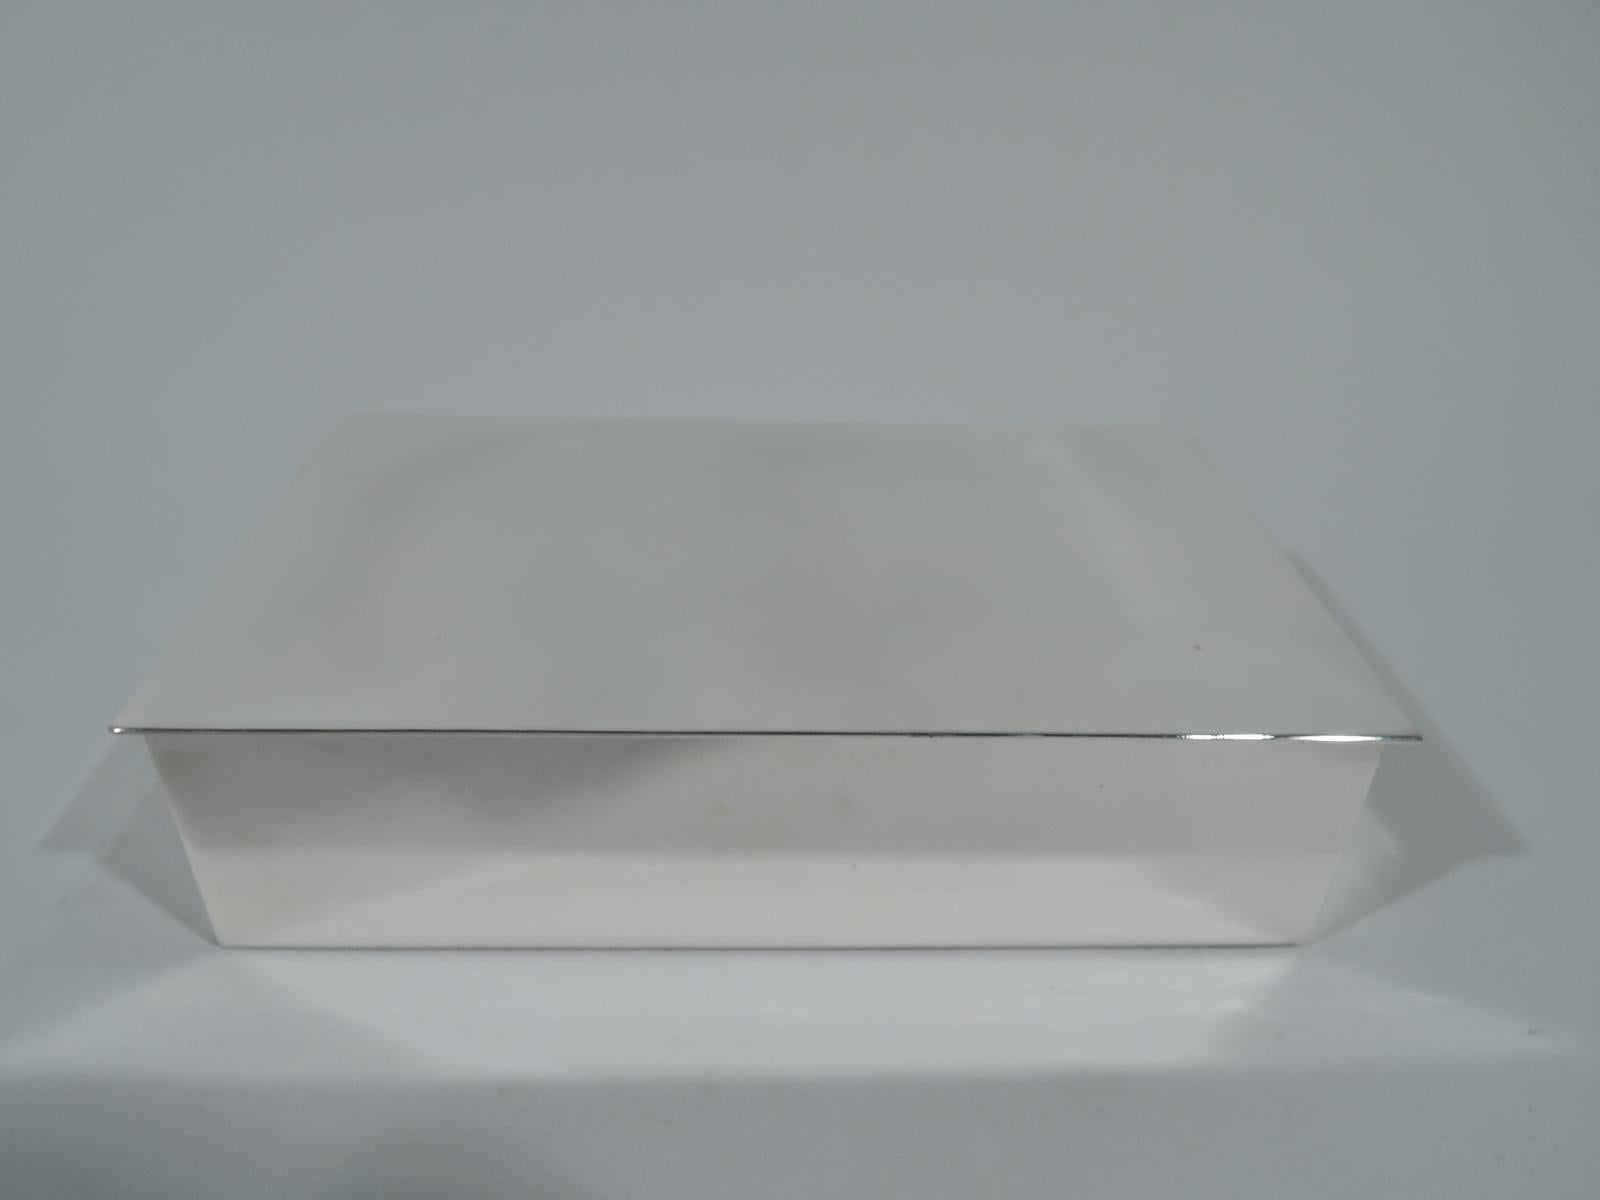 Mid-Century Modern sterling silver box. Made by Tiffany & Co. in New York. Rectangular with straight sides and crisp corners. Cover is hinged and flat with slight overhang. Box interior cedar lined. Austere and functional. Hallmark includes postwar